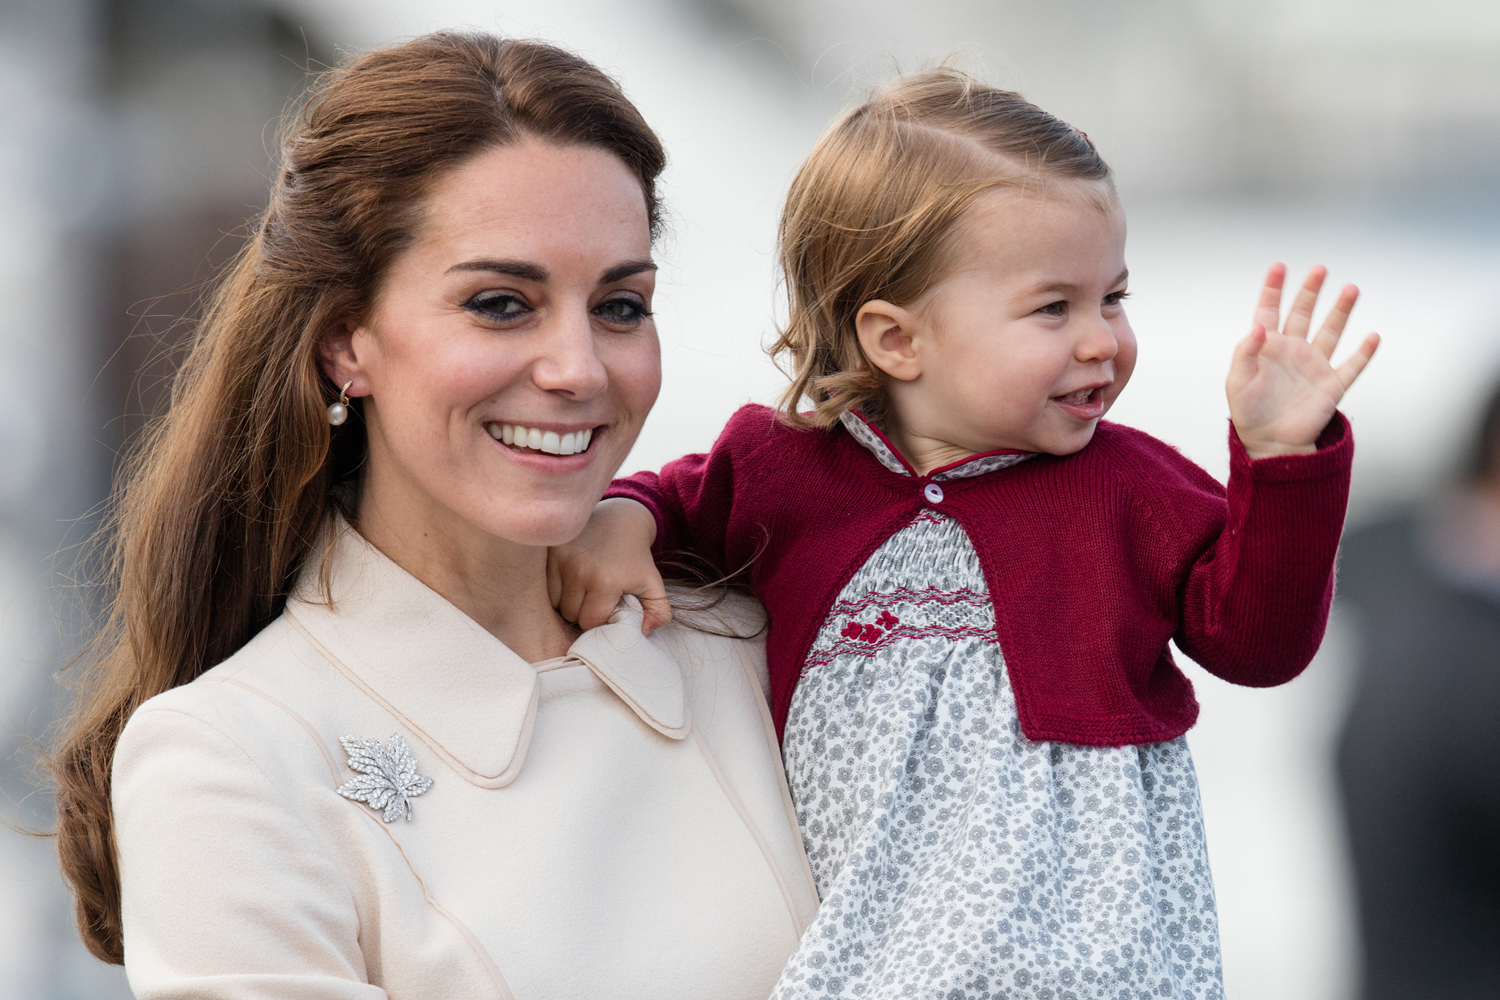 A Sweet Video Of Princess Charlotte Copying Kate Middleton Is Going Viral